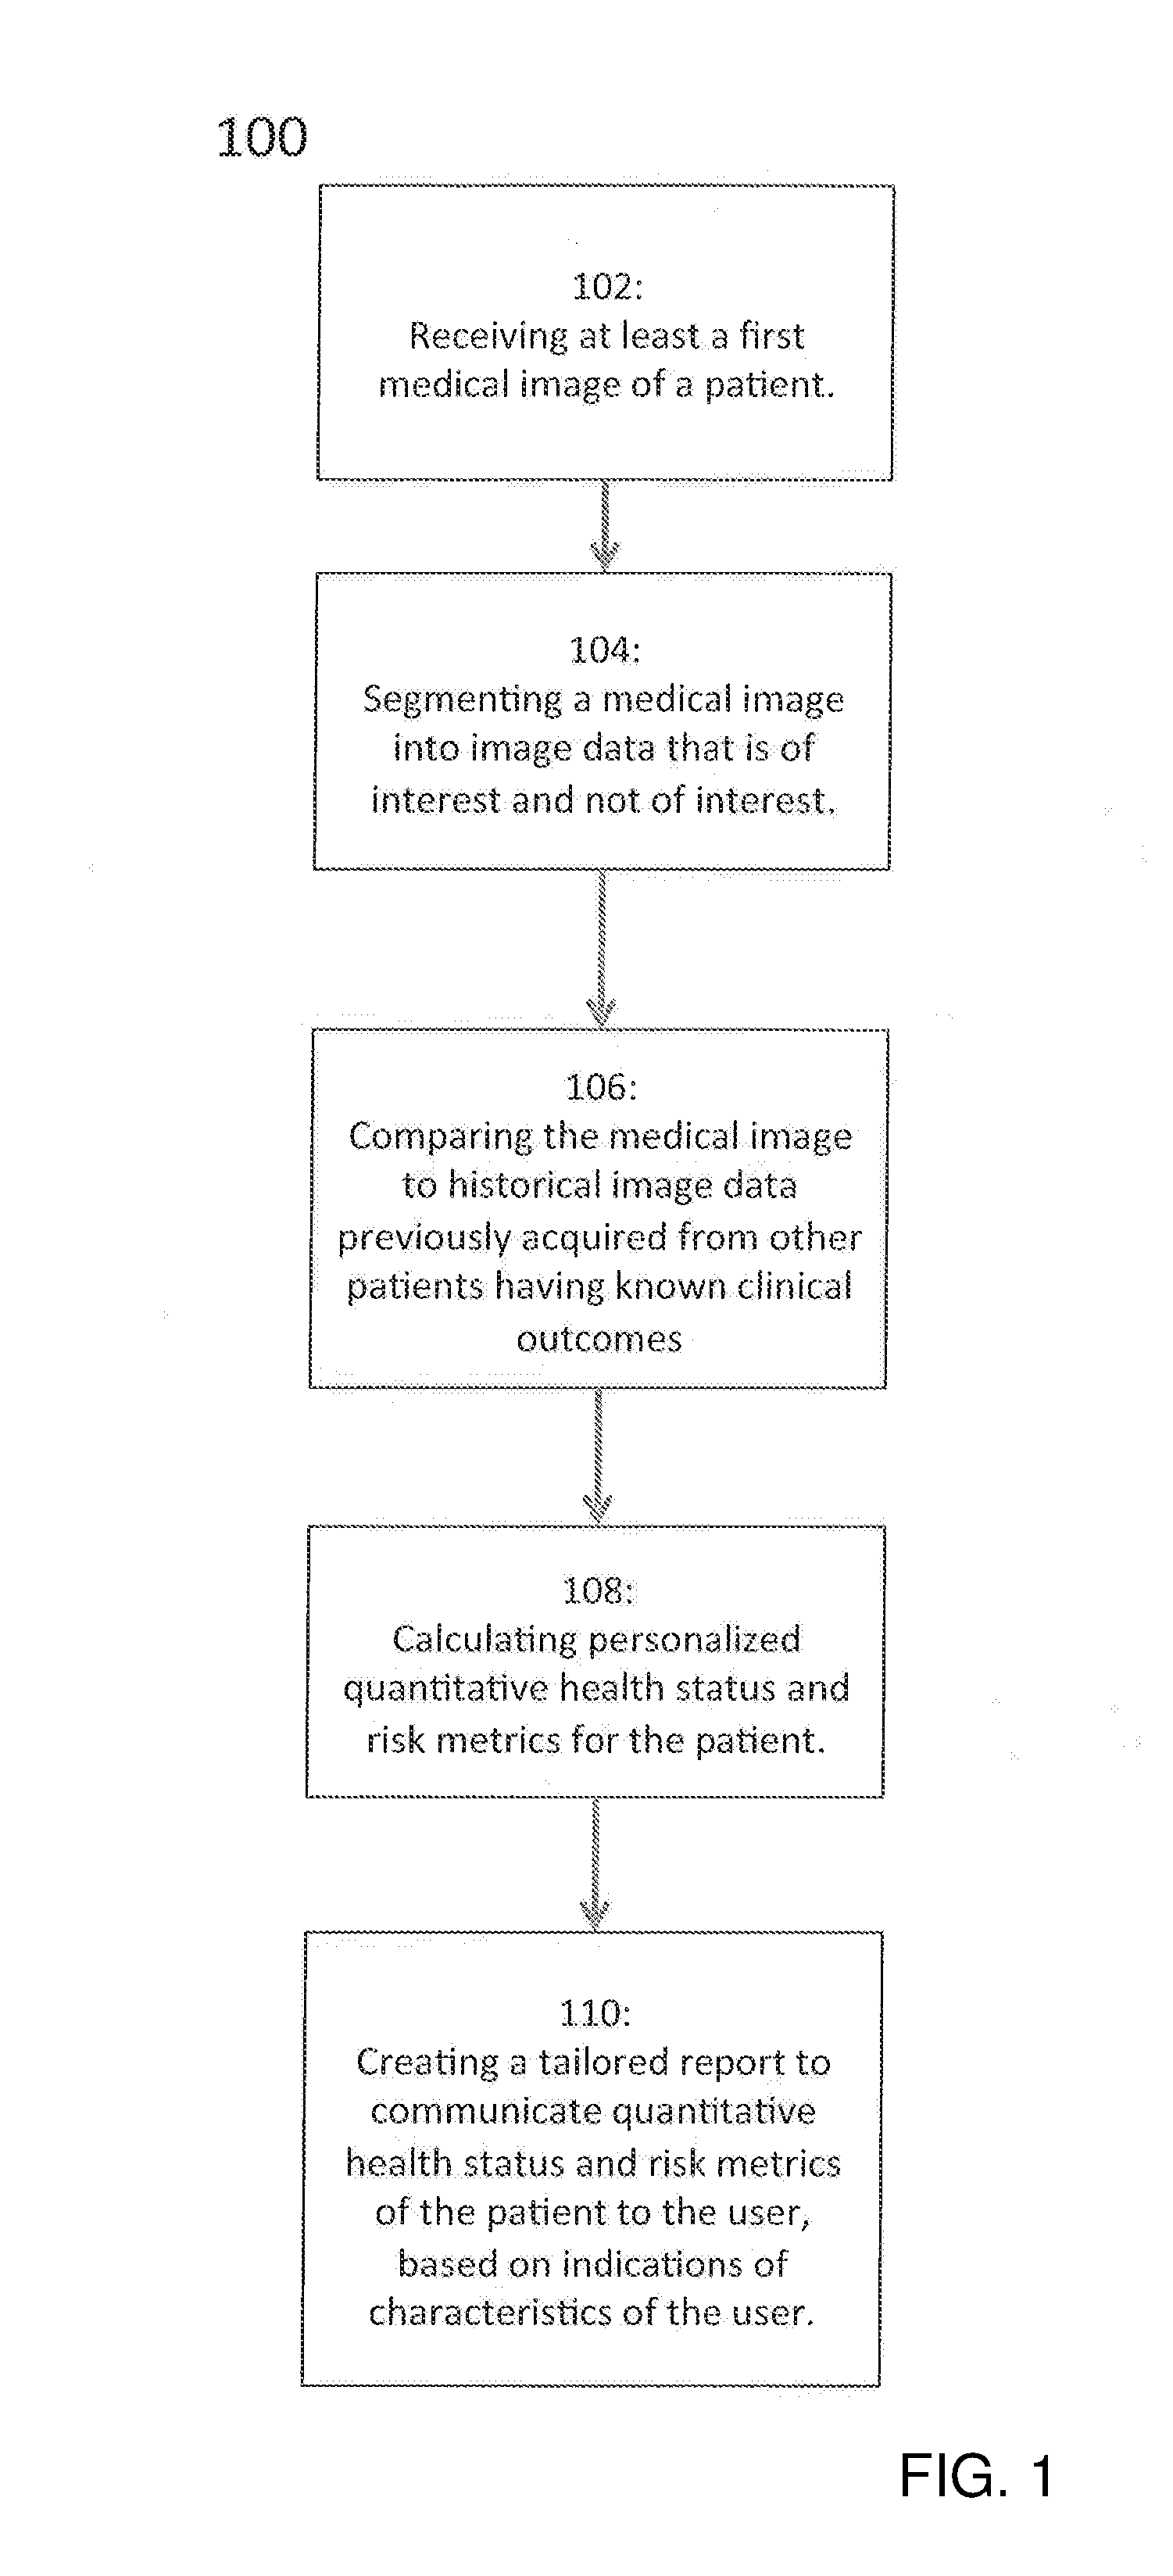 Systems and methods for analyzing medical images and creating a report